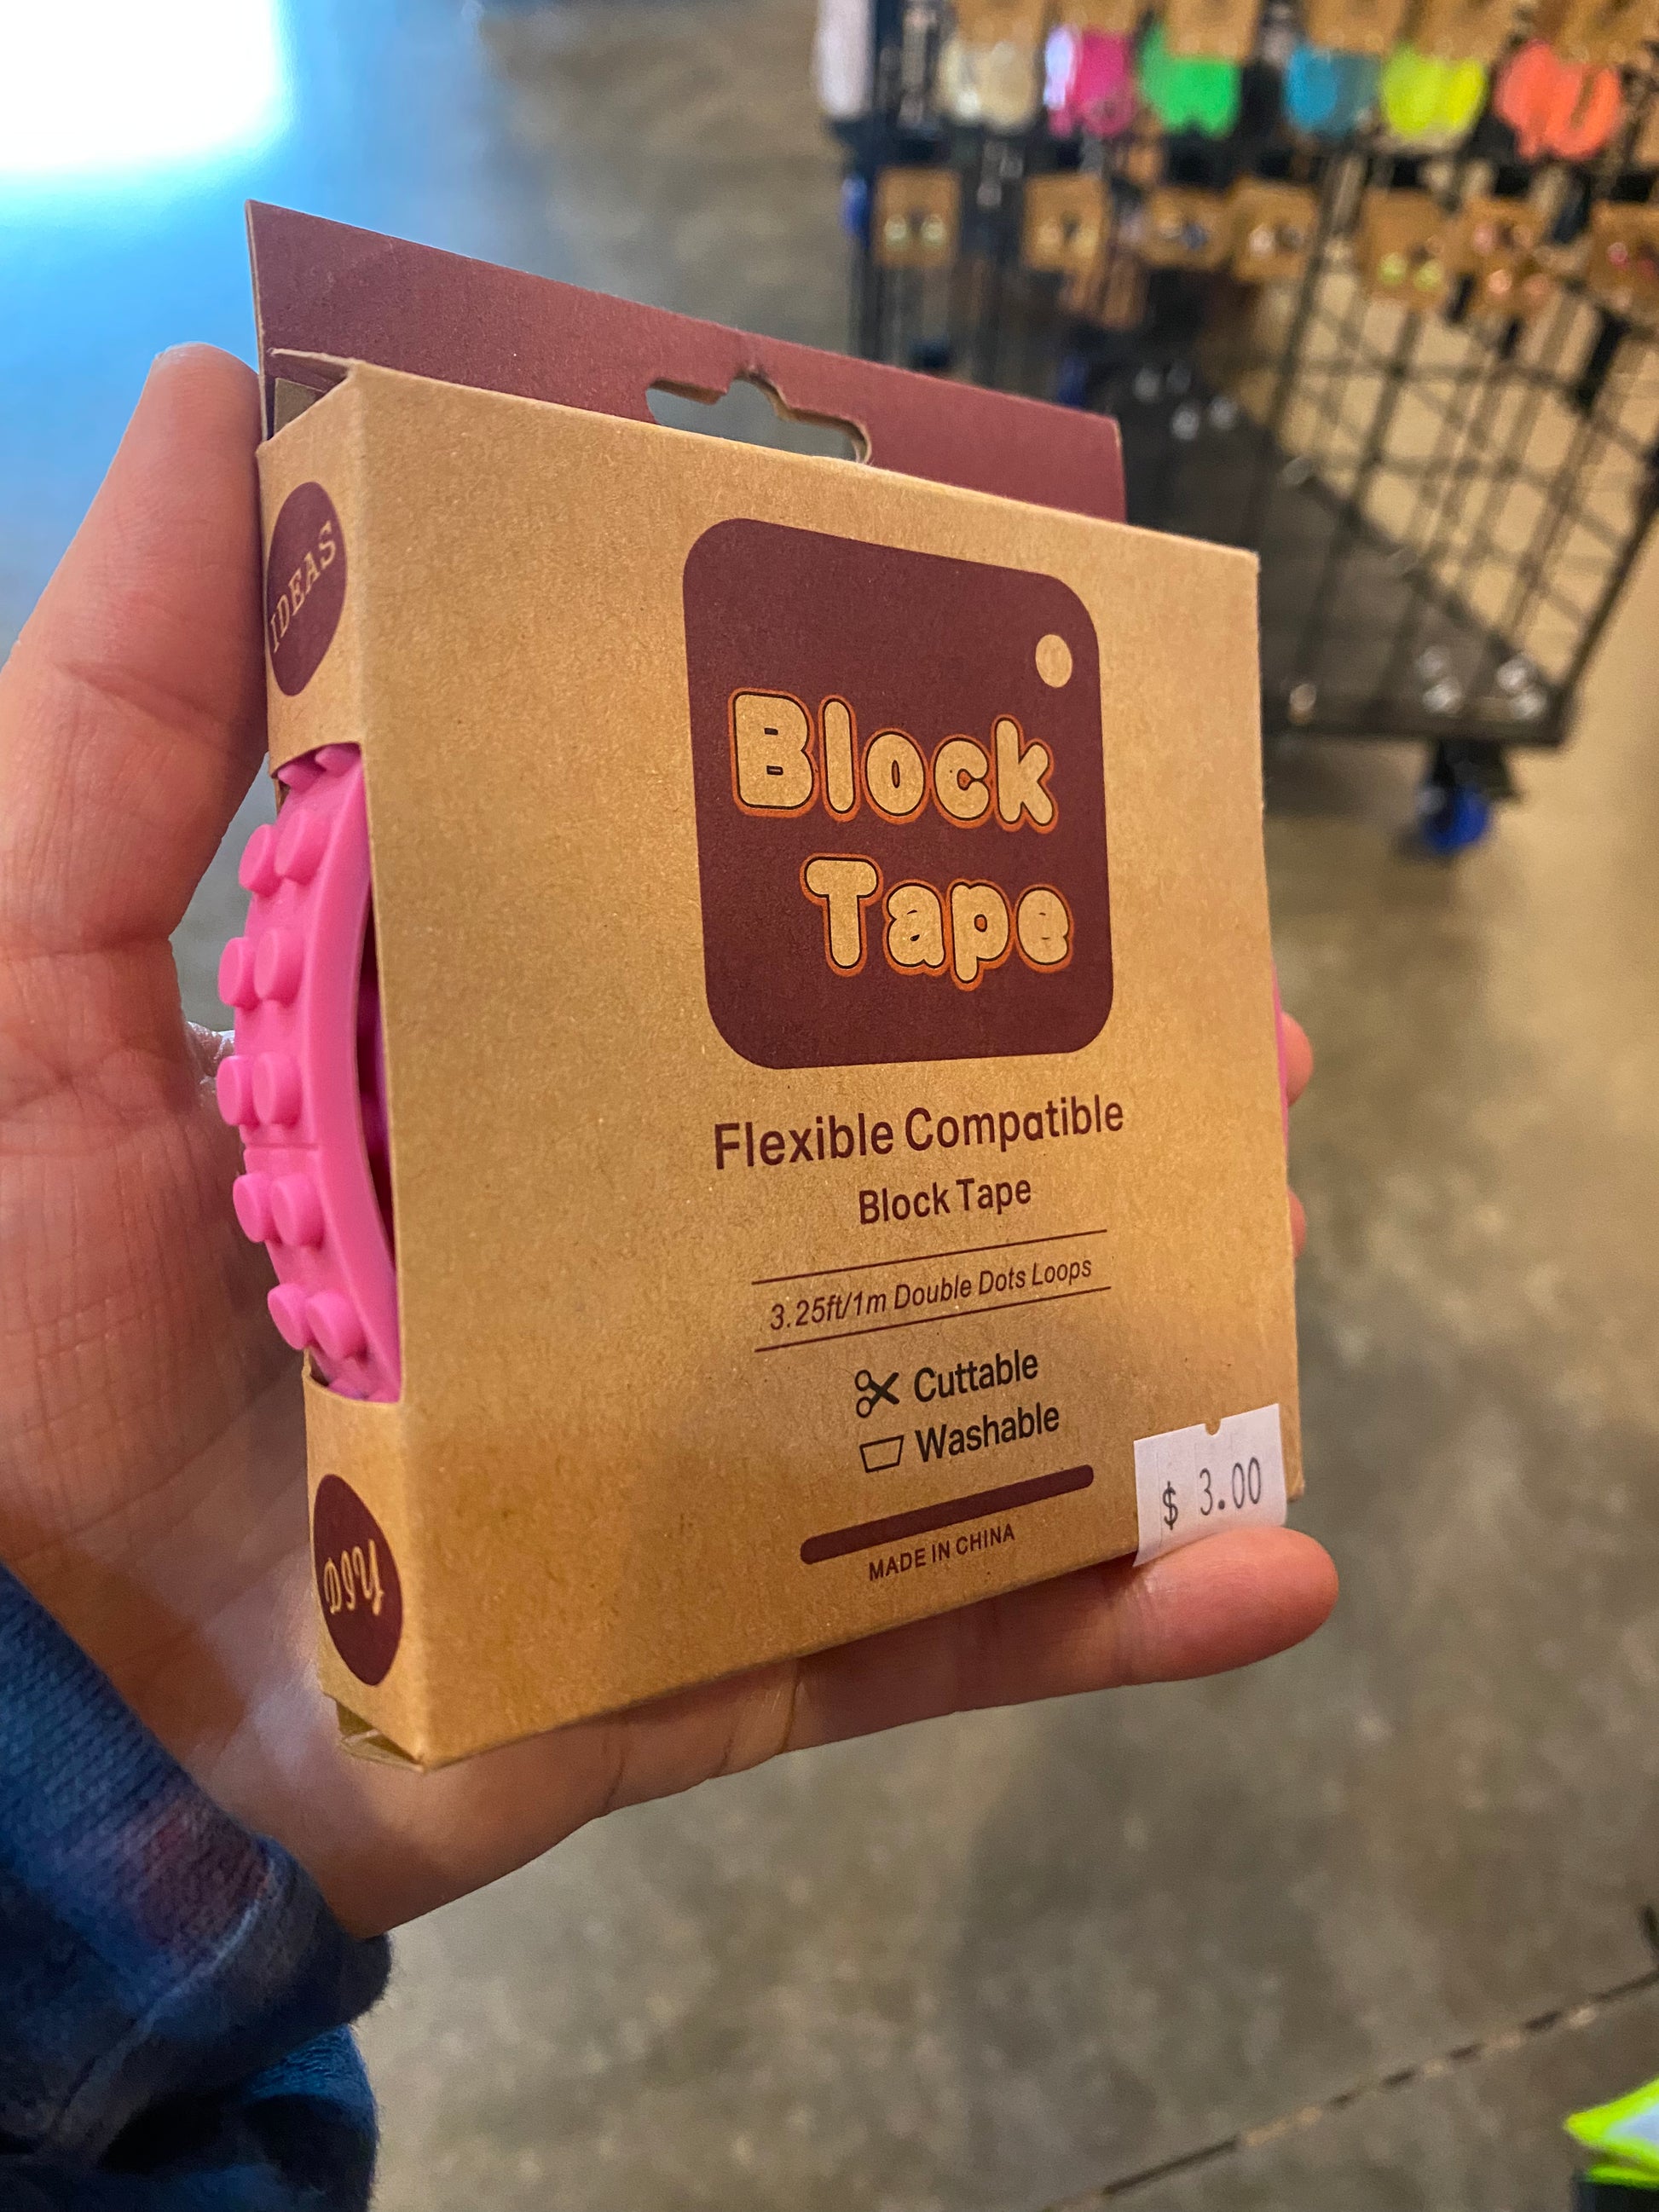 LEGO Tape Review – Does it work? 